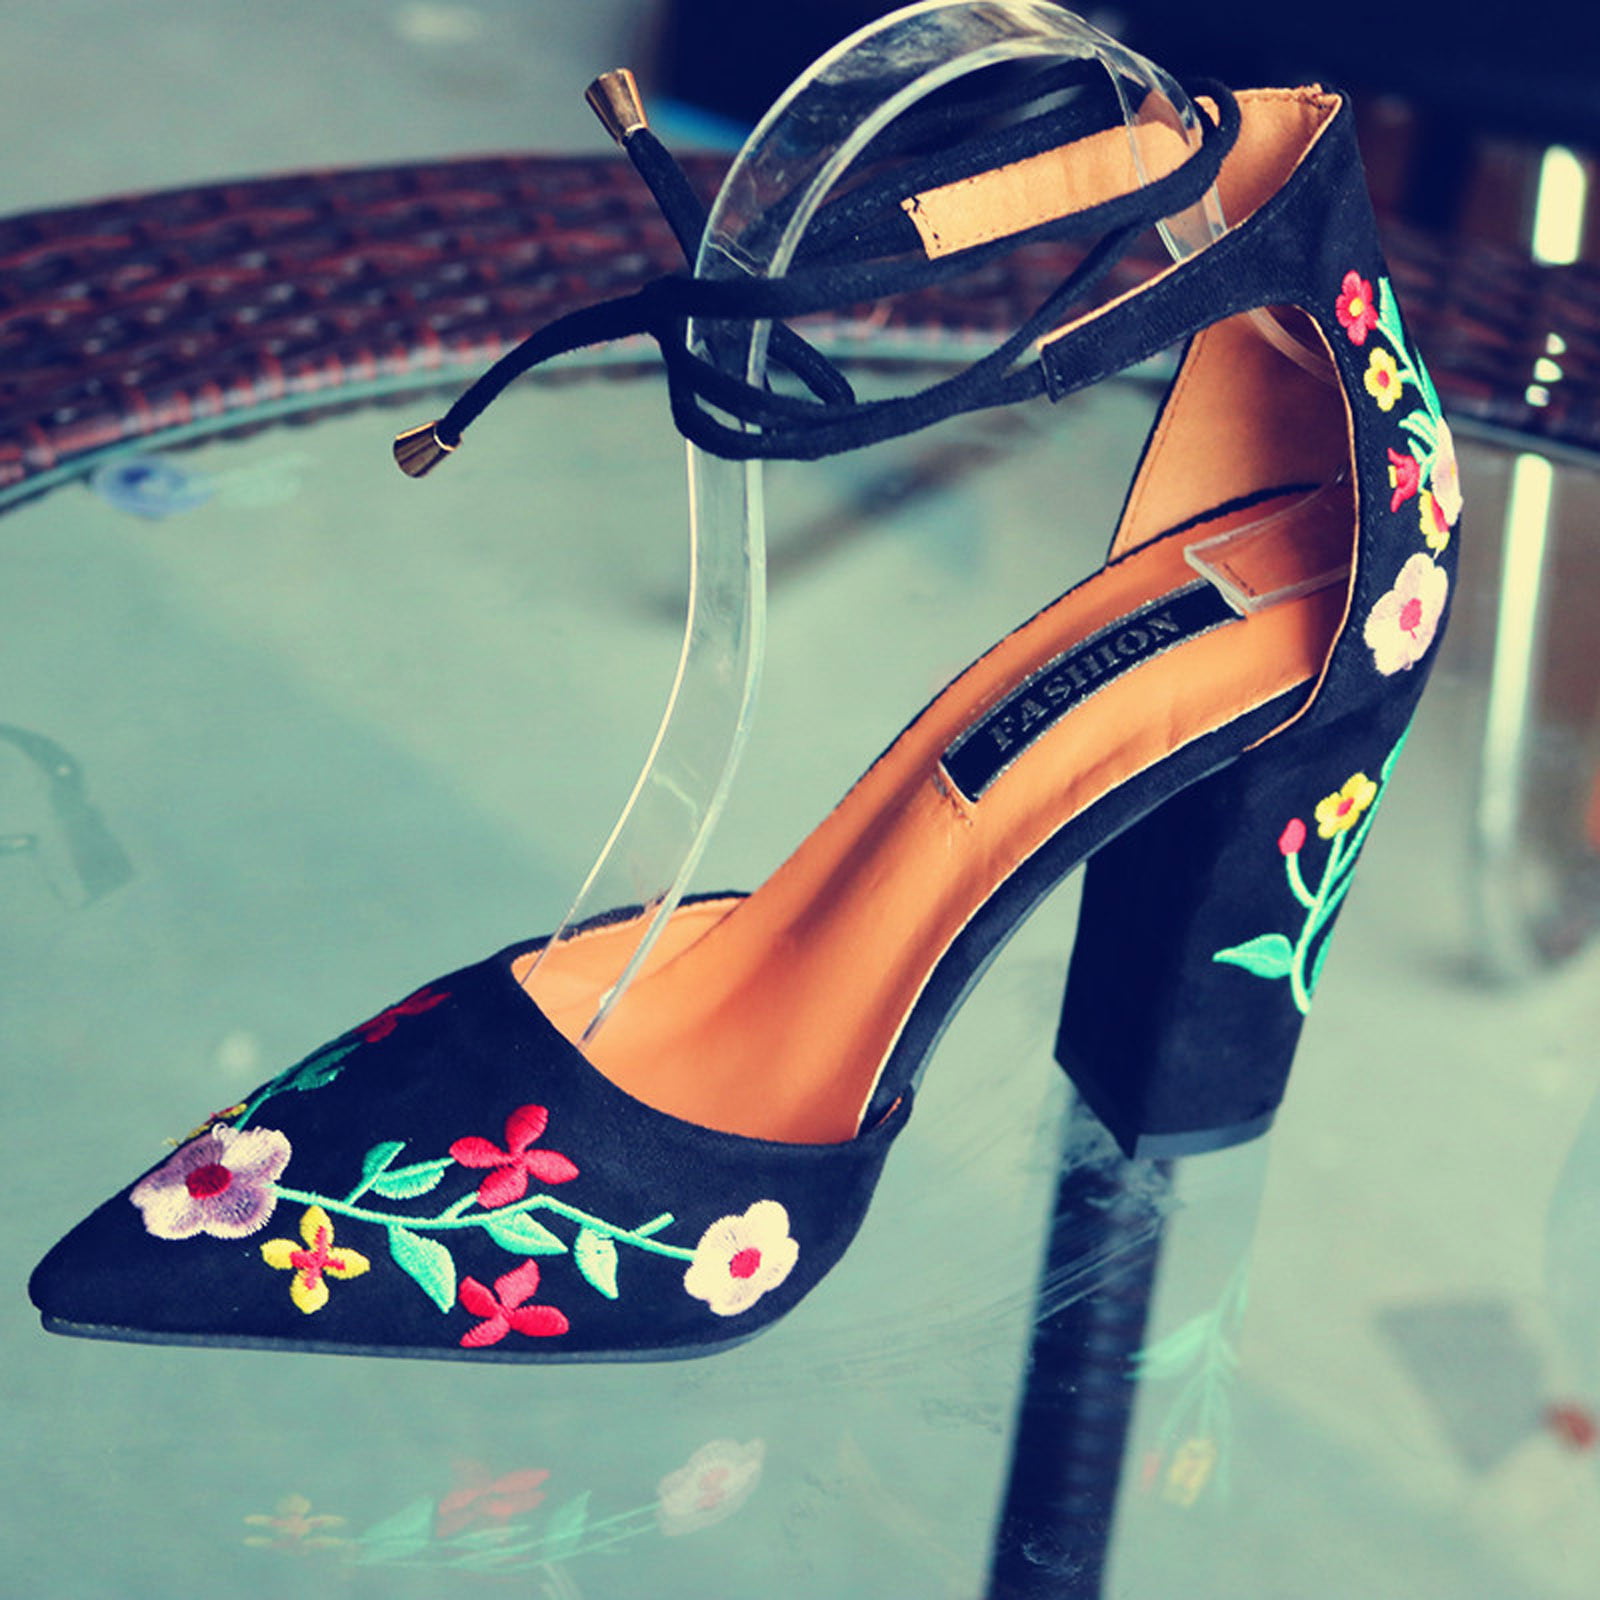 Embroidered Floral Heels You've Been Missing Out On -Shoe Land